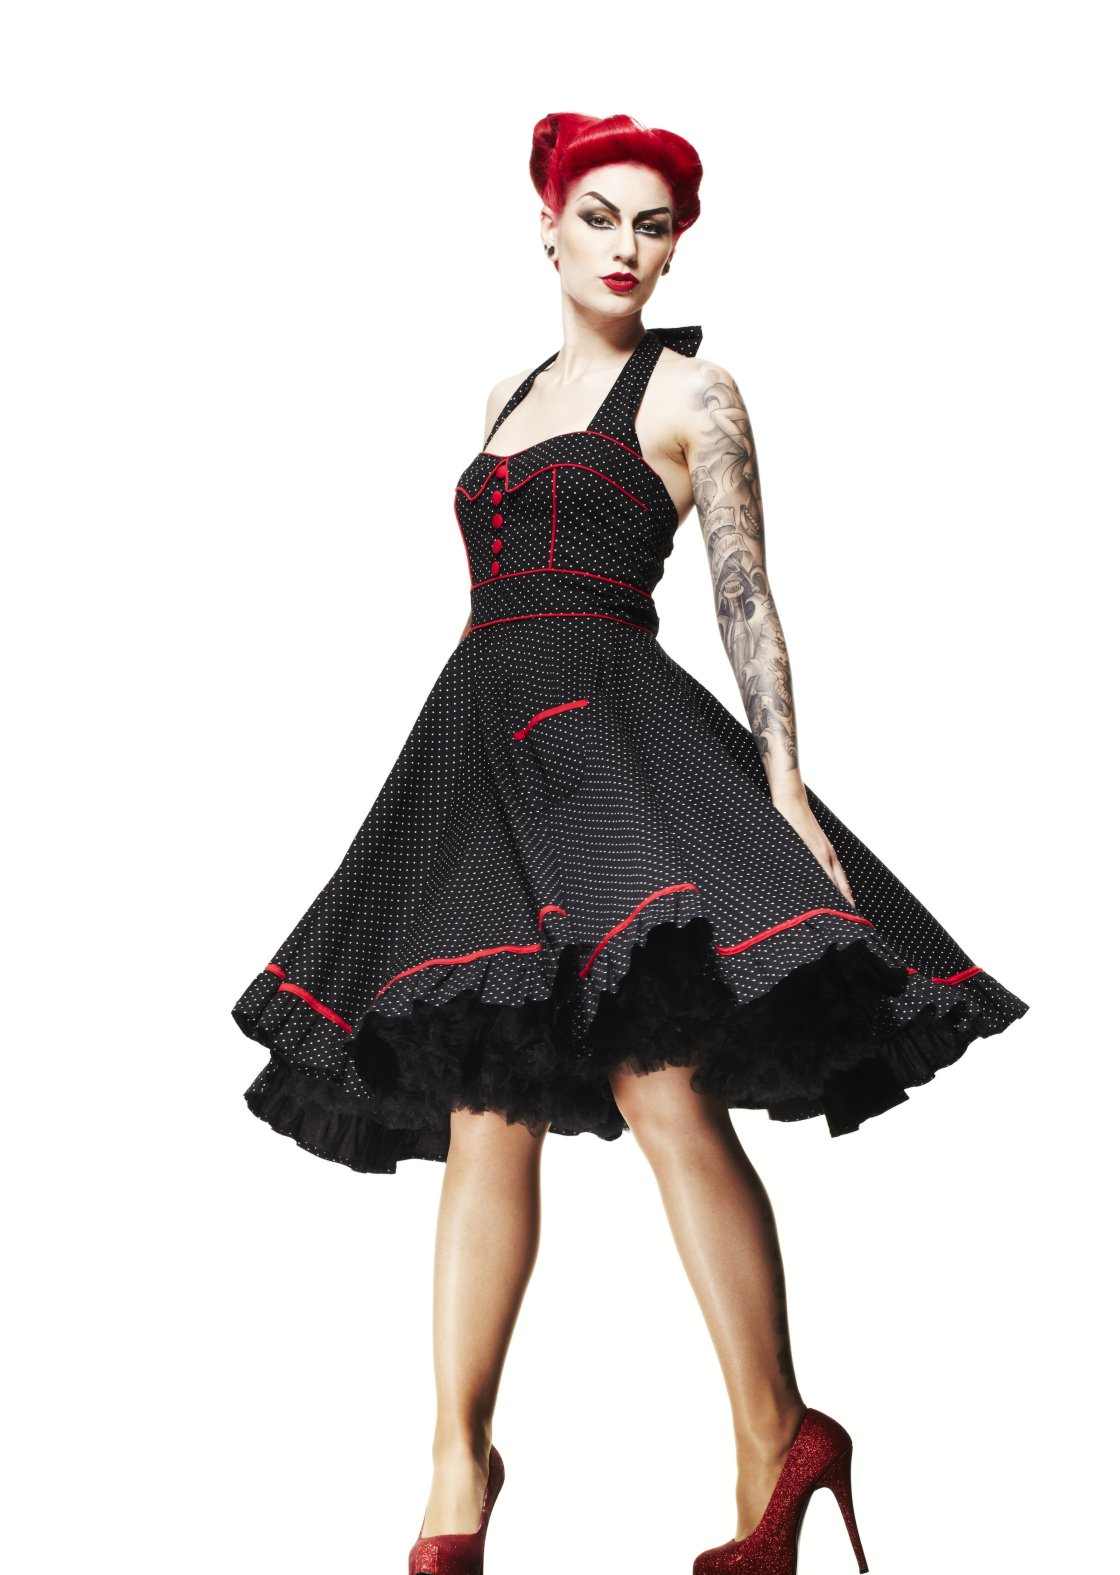 Robe Pin-Up Rockabilly 50'S Rétro Hell Bunny Vanity Pois - Vêtements concernant Mode Année 50 Pin Up